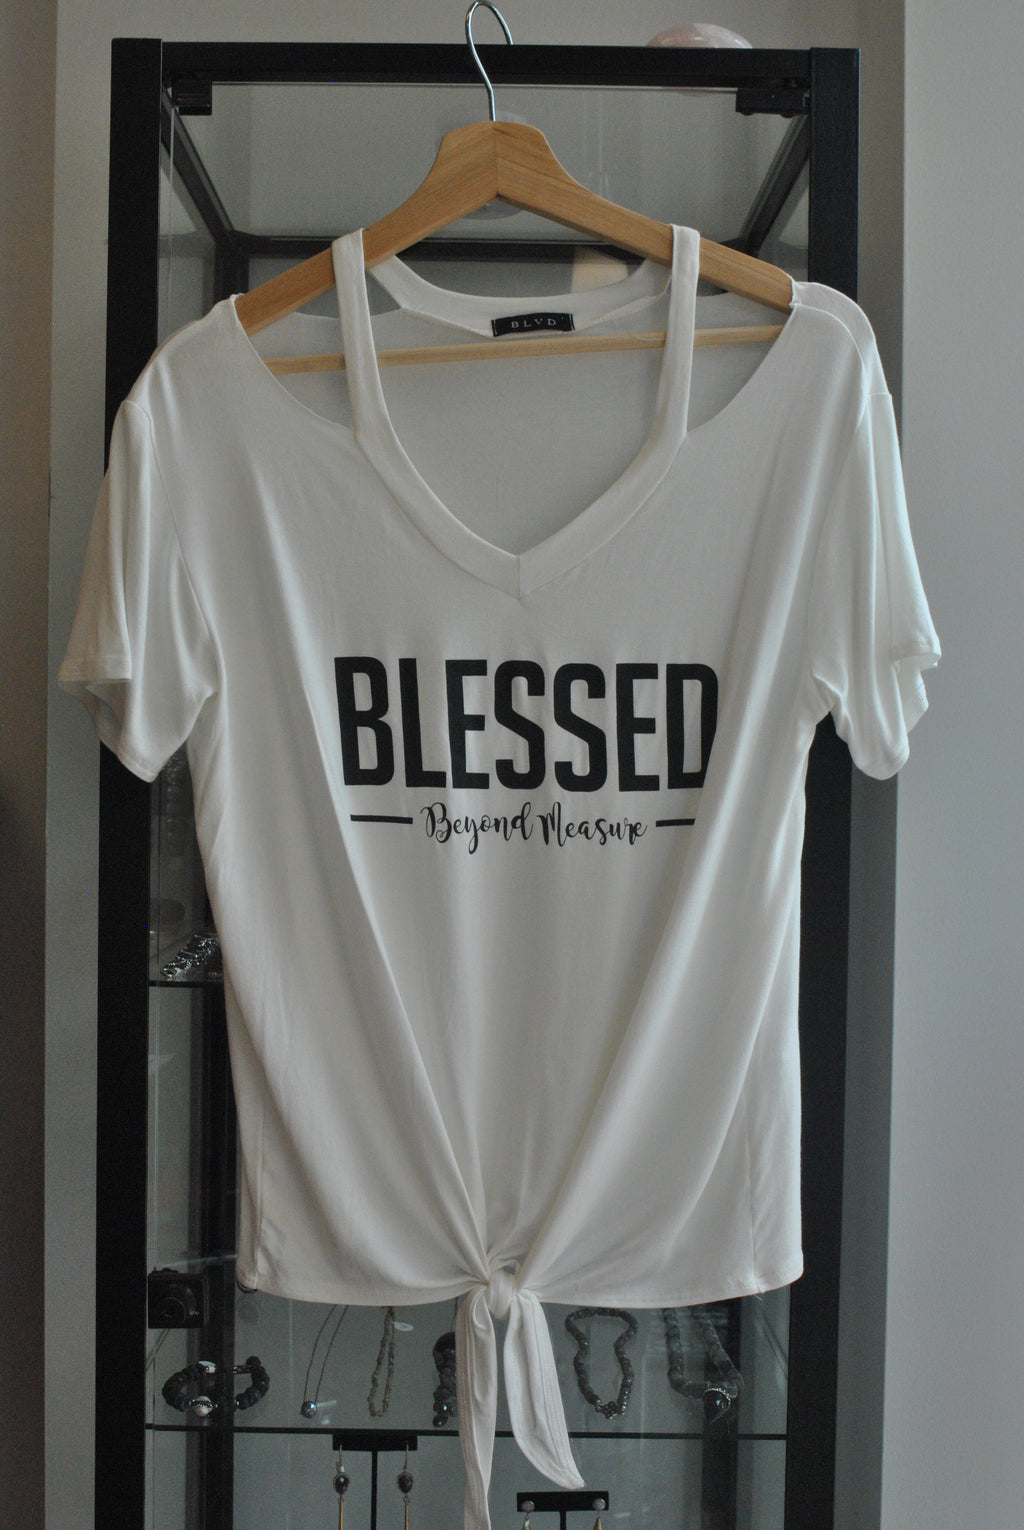 WHITE GRAPHIC T-SHIRT - "BLESSED"